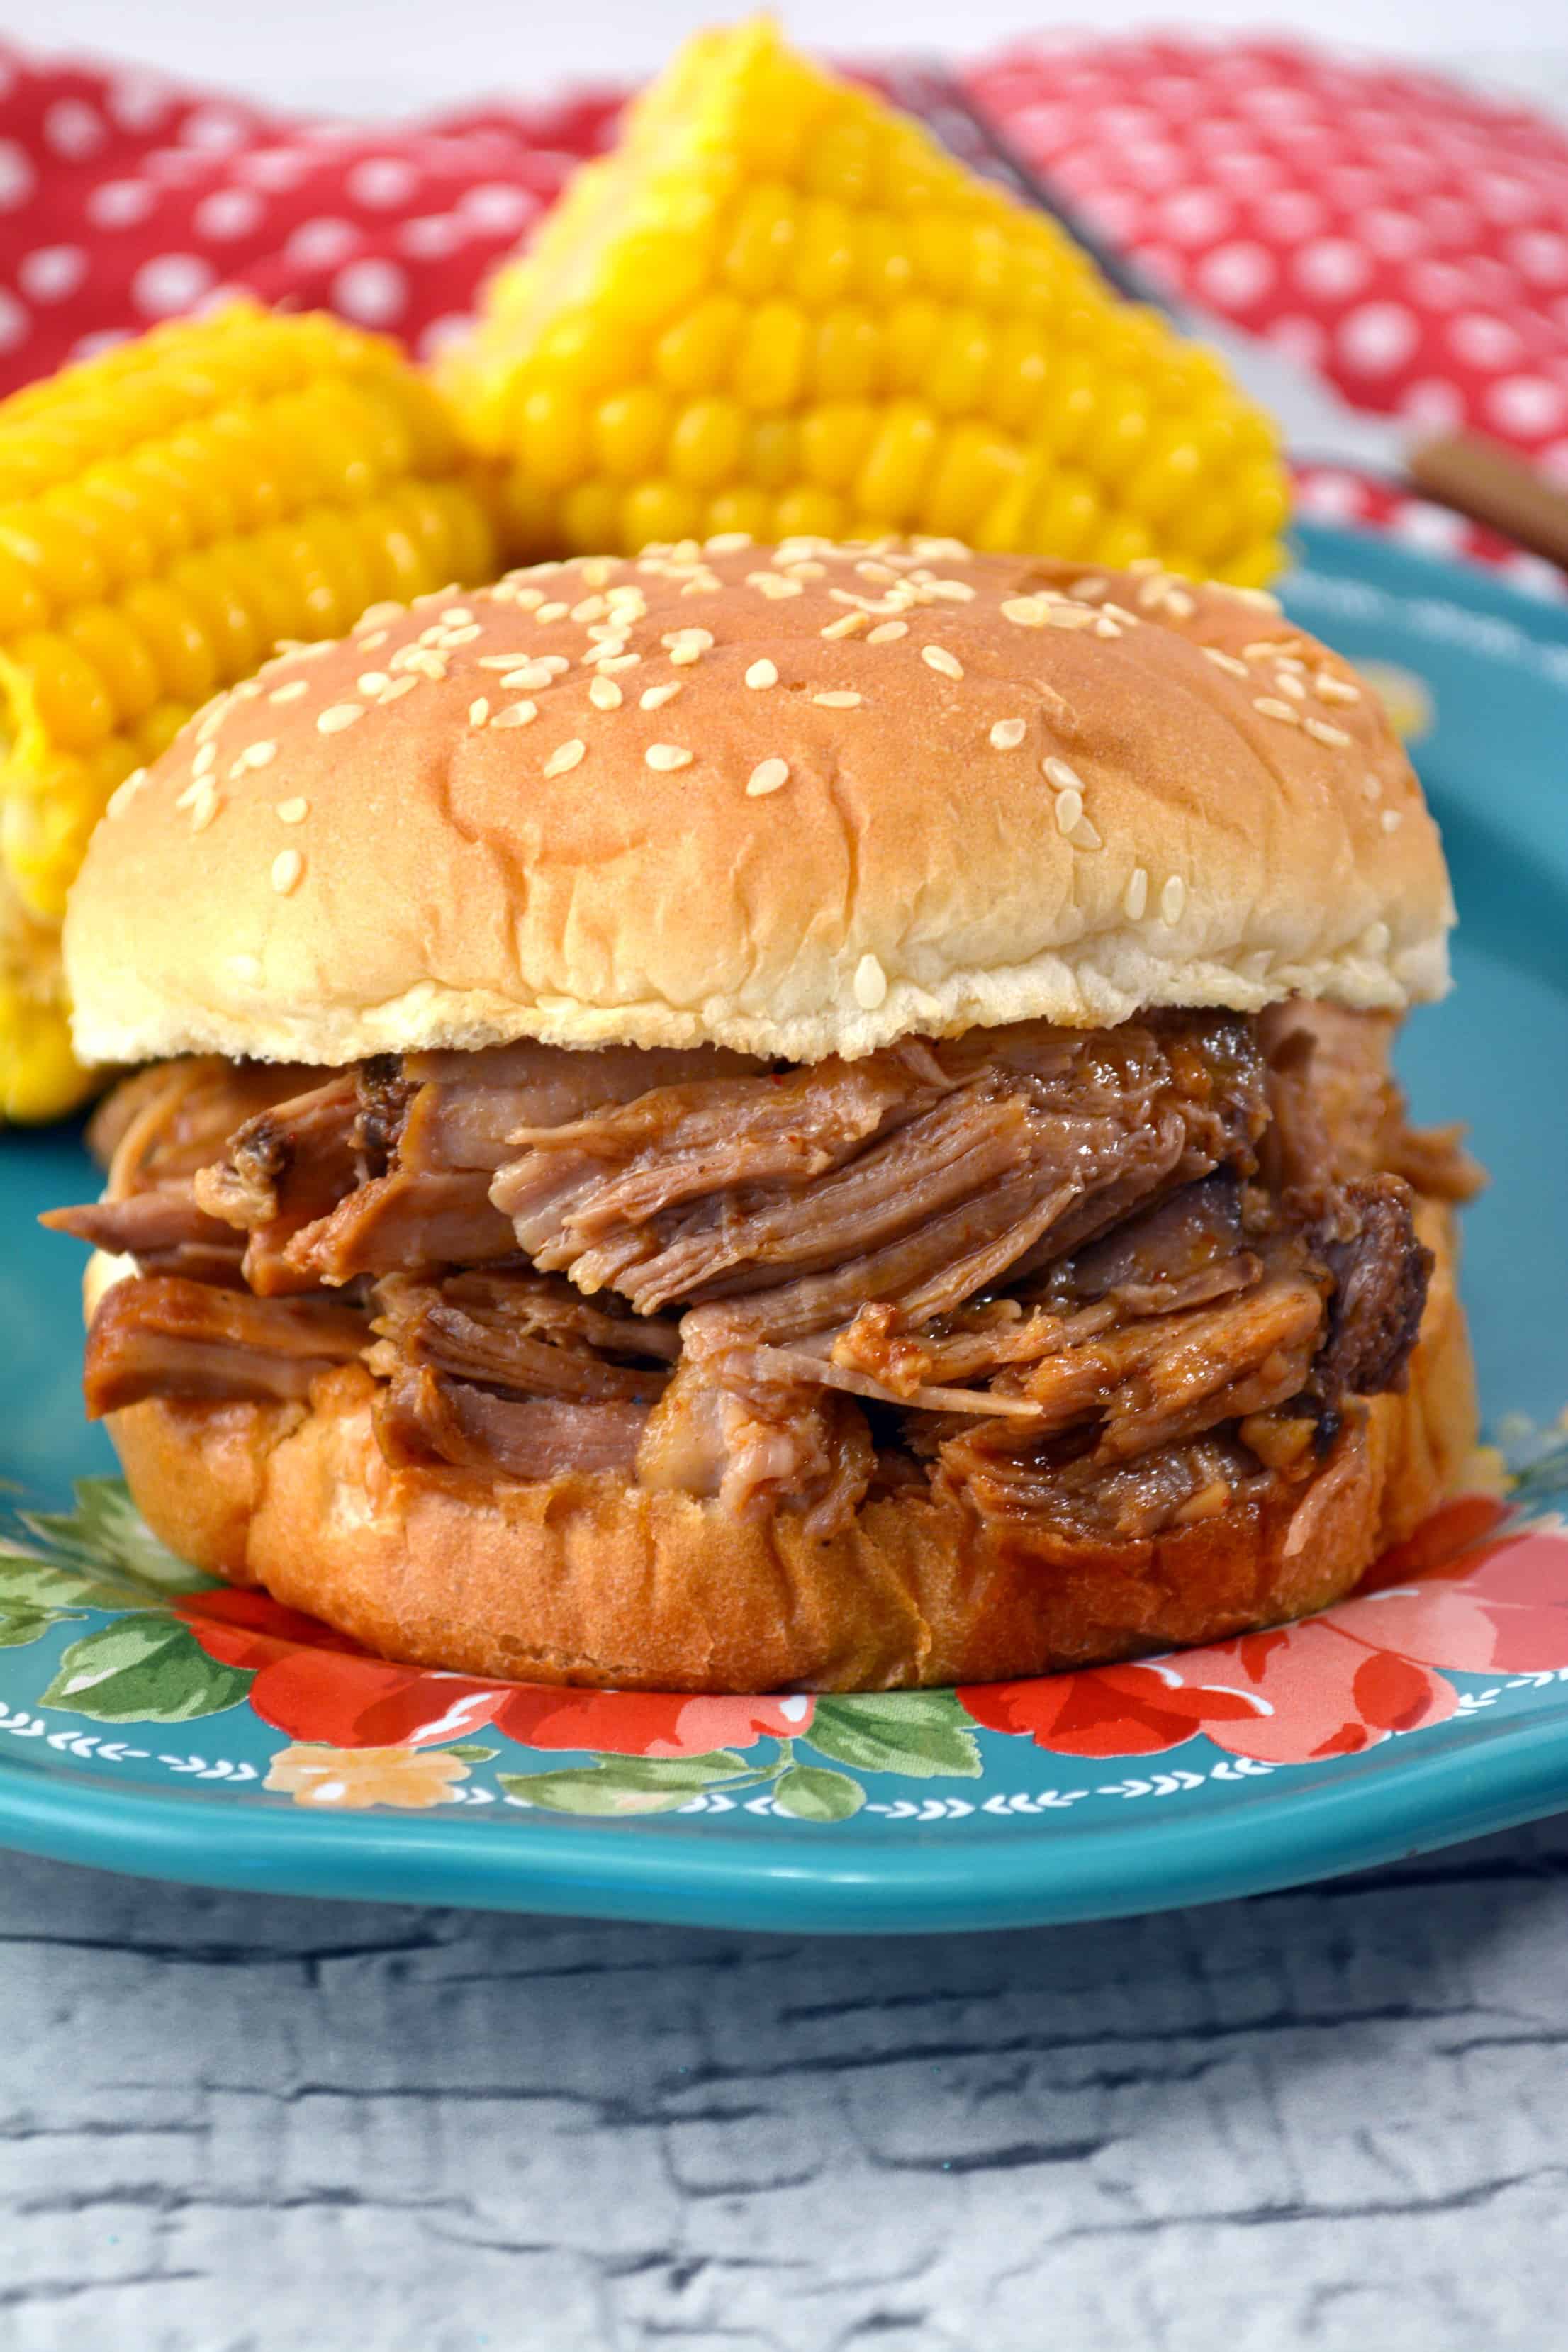 Slow Cooker Pulled Pork Sandwiches Bbq Pulled Pork,What Is A Pergola Good For